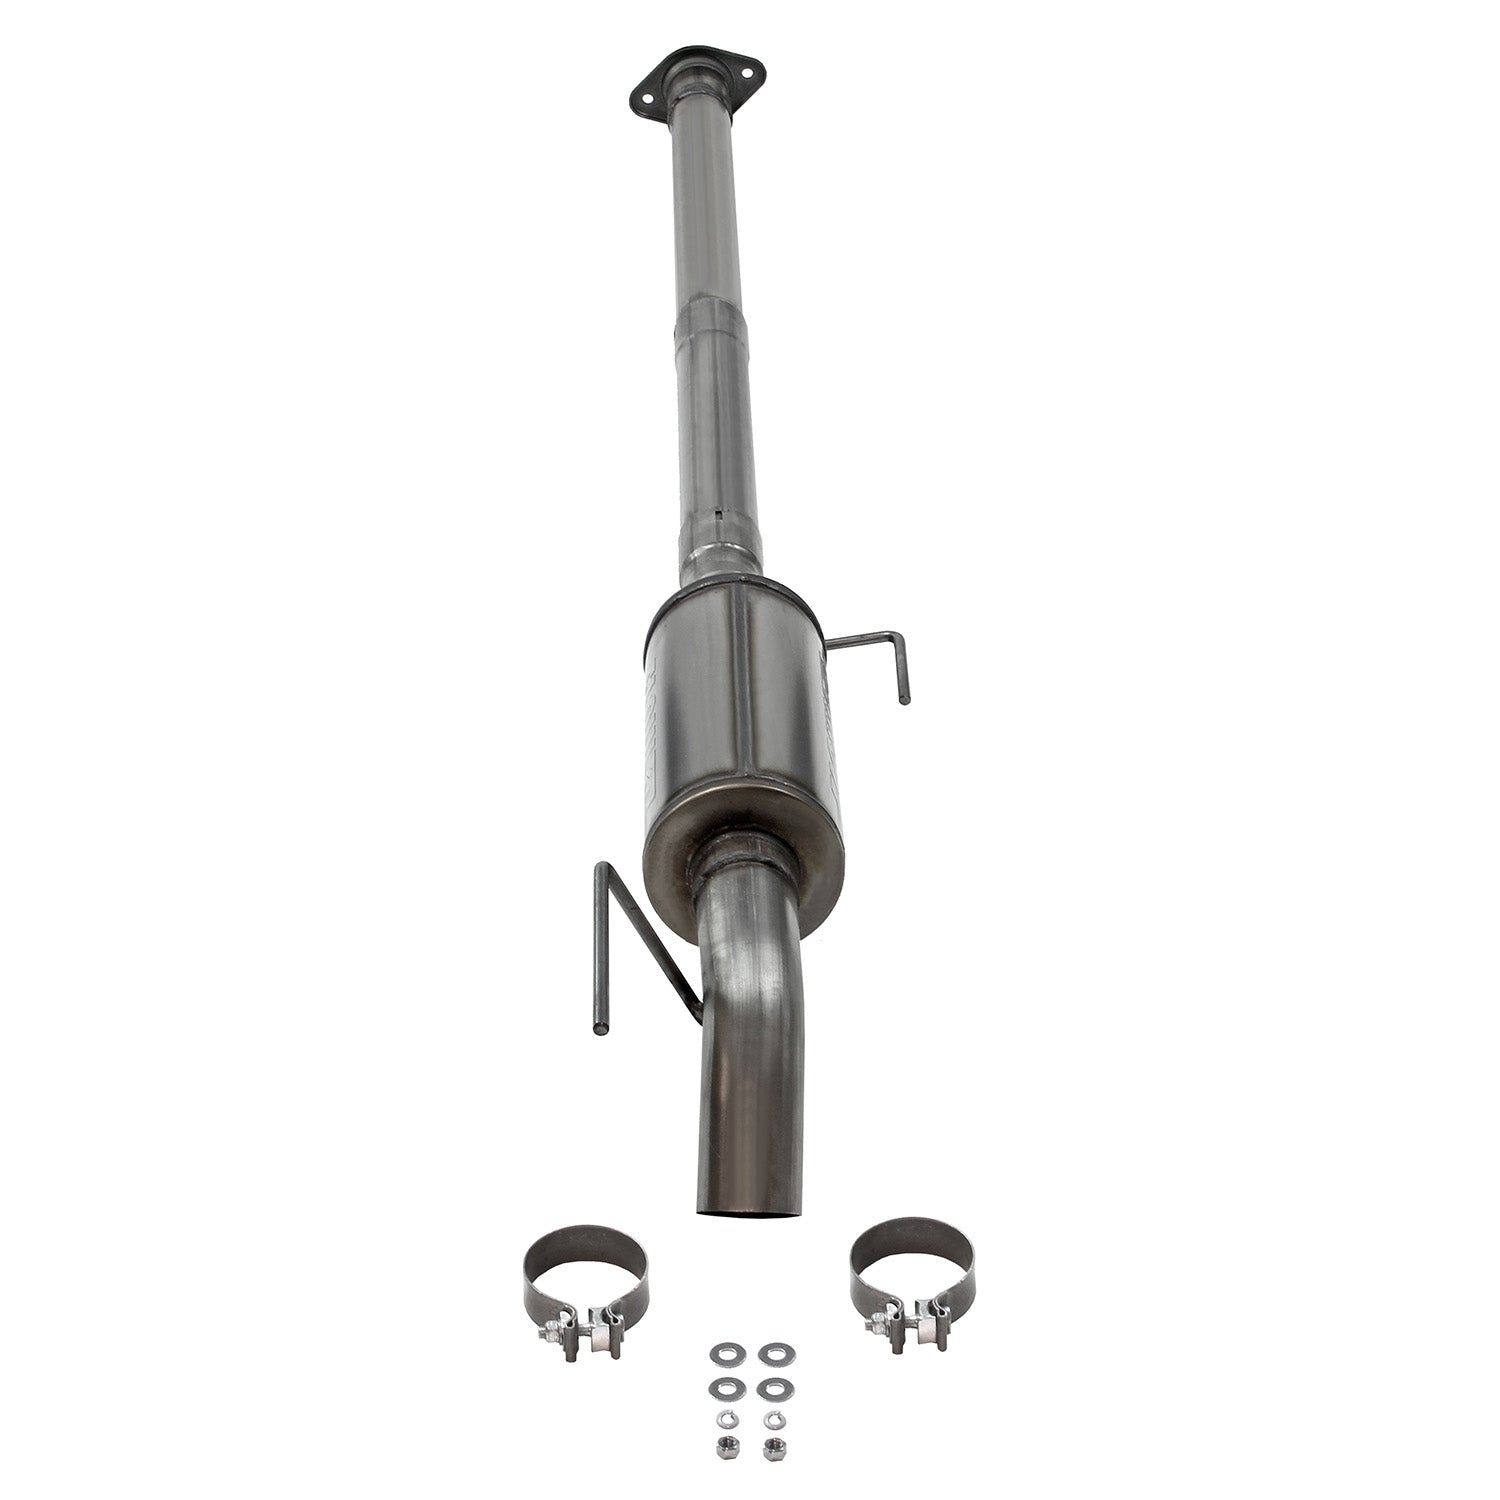 Flowmaster 09-14 Ford F-150 (3.5, 4.6, 5.0, 5.4) Exhaust System Kit 717980